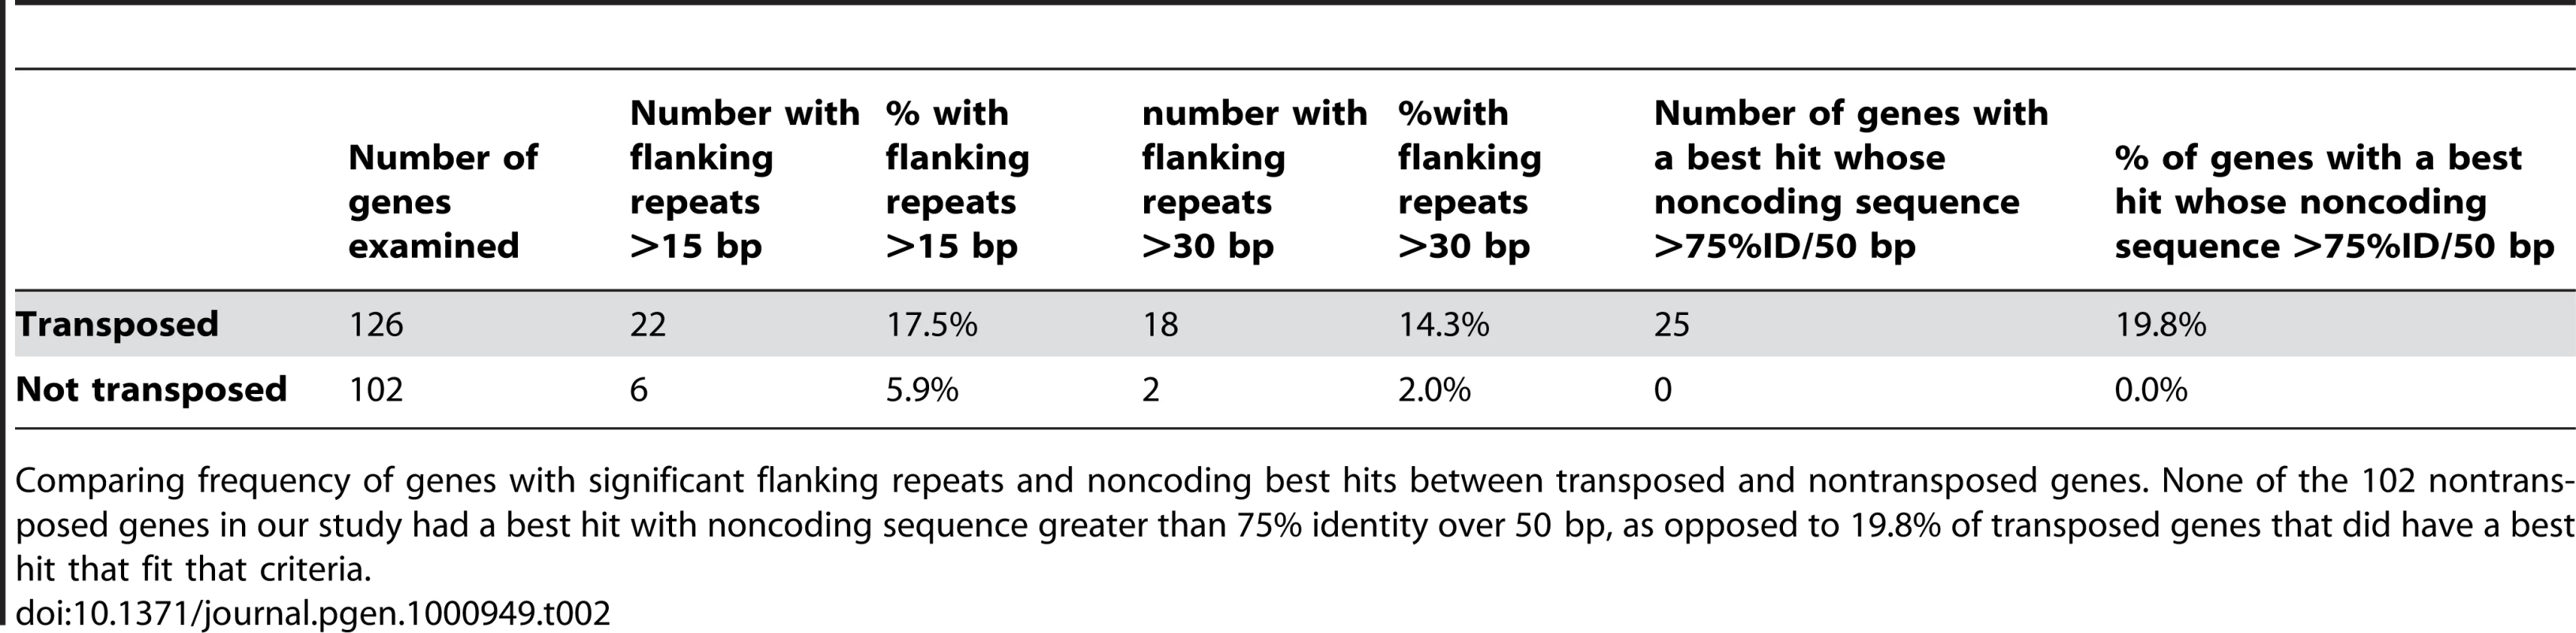 Sequence similarity with best blastn hit and frequency of flanking repeats in transposed versus nontransposed genes.